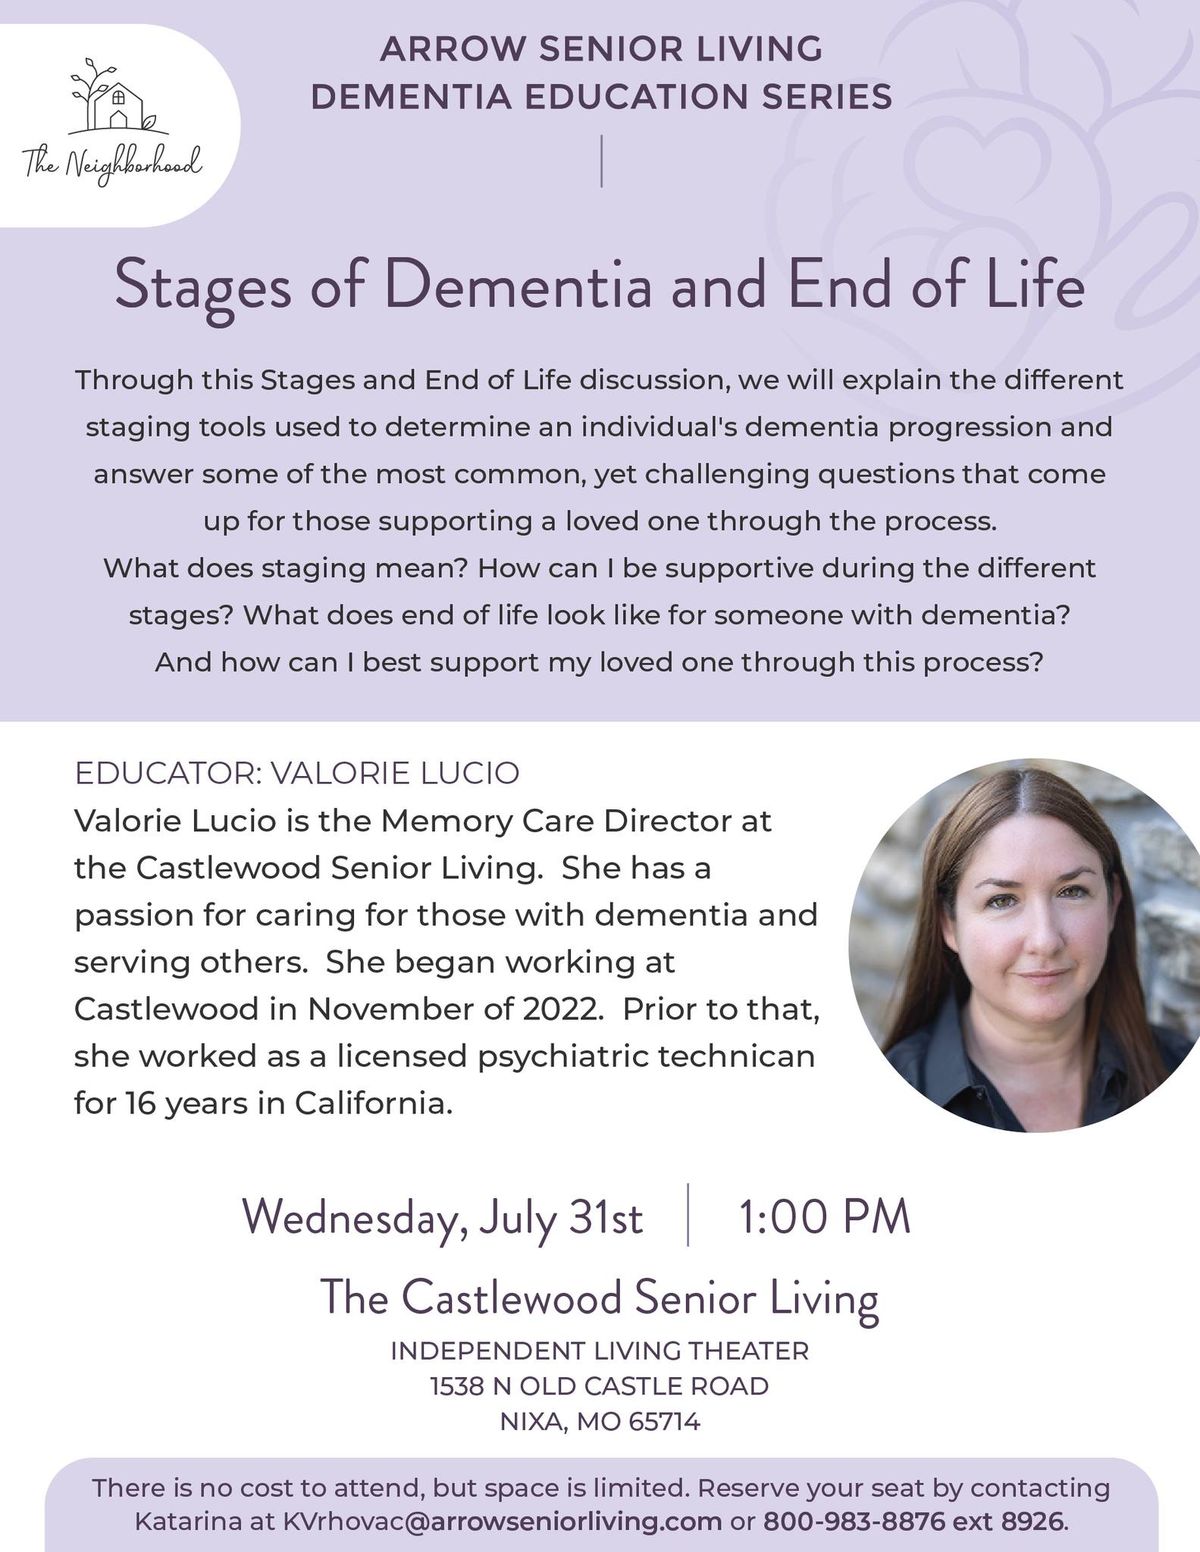 Education Series: Stages of Dementia and End of Life